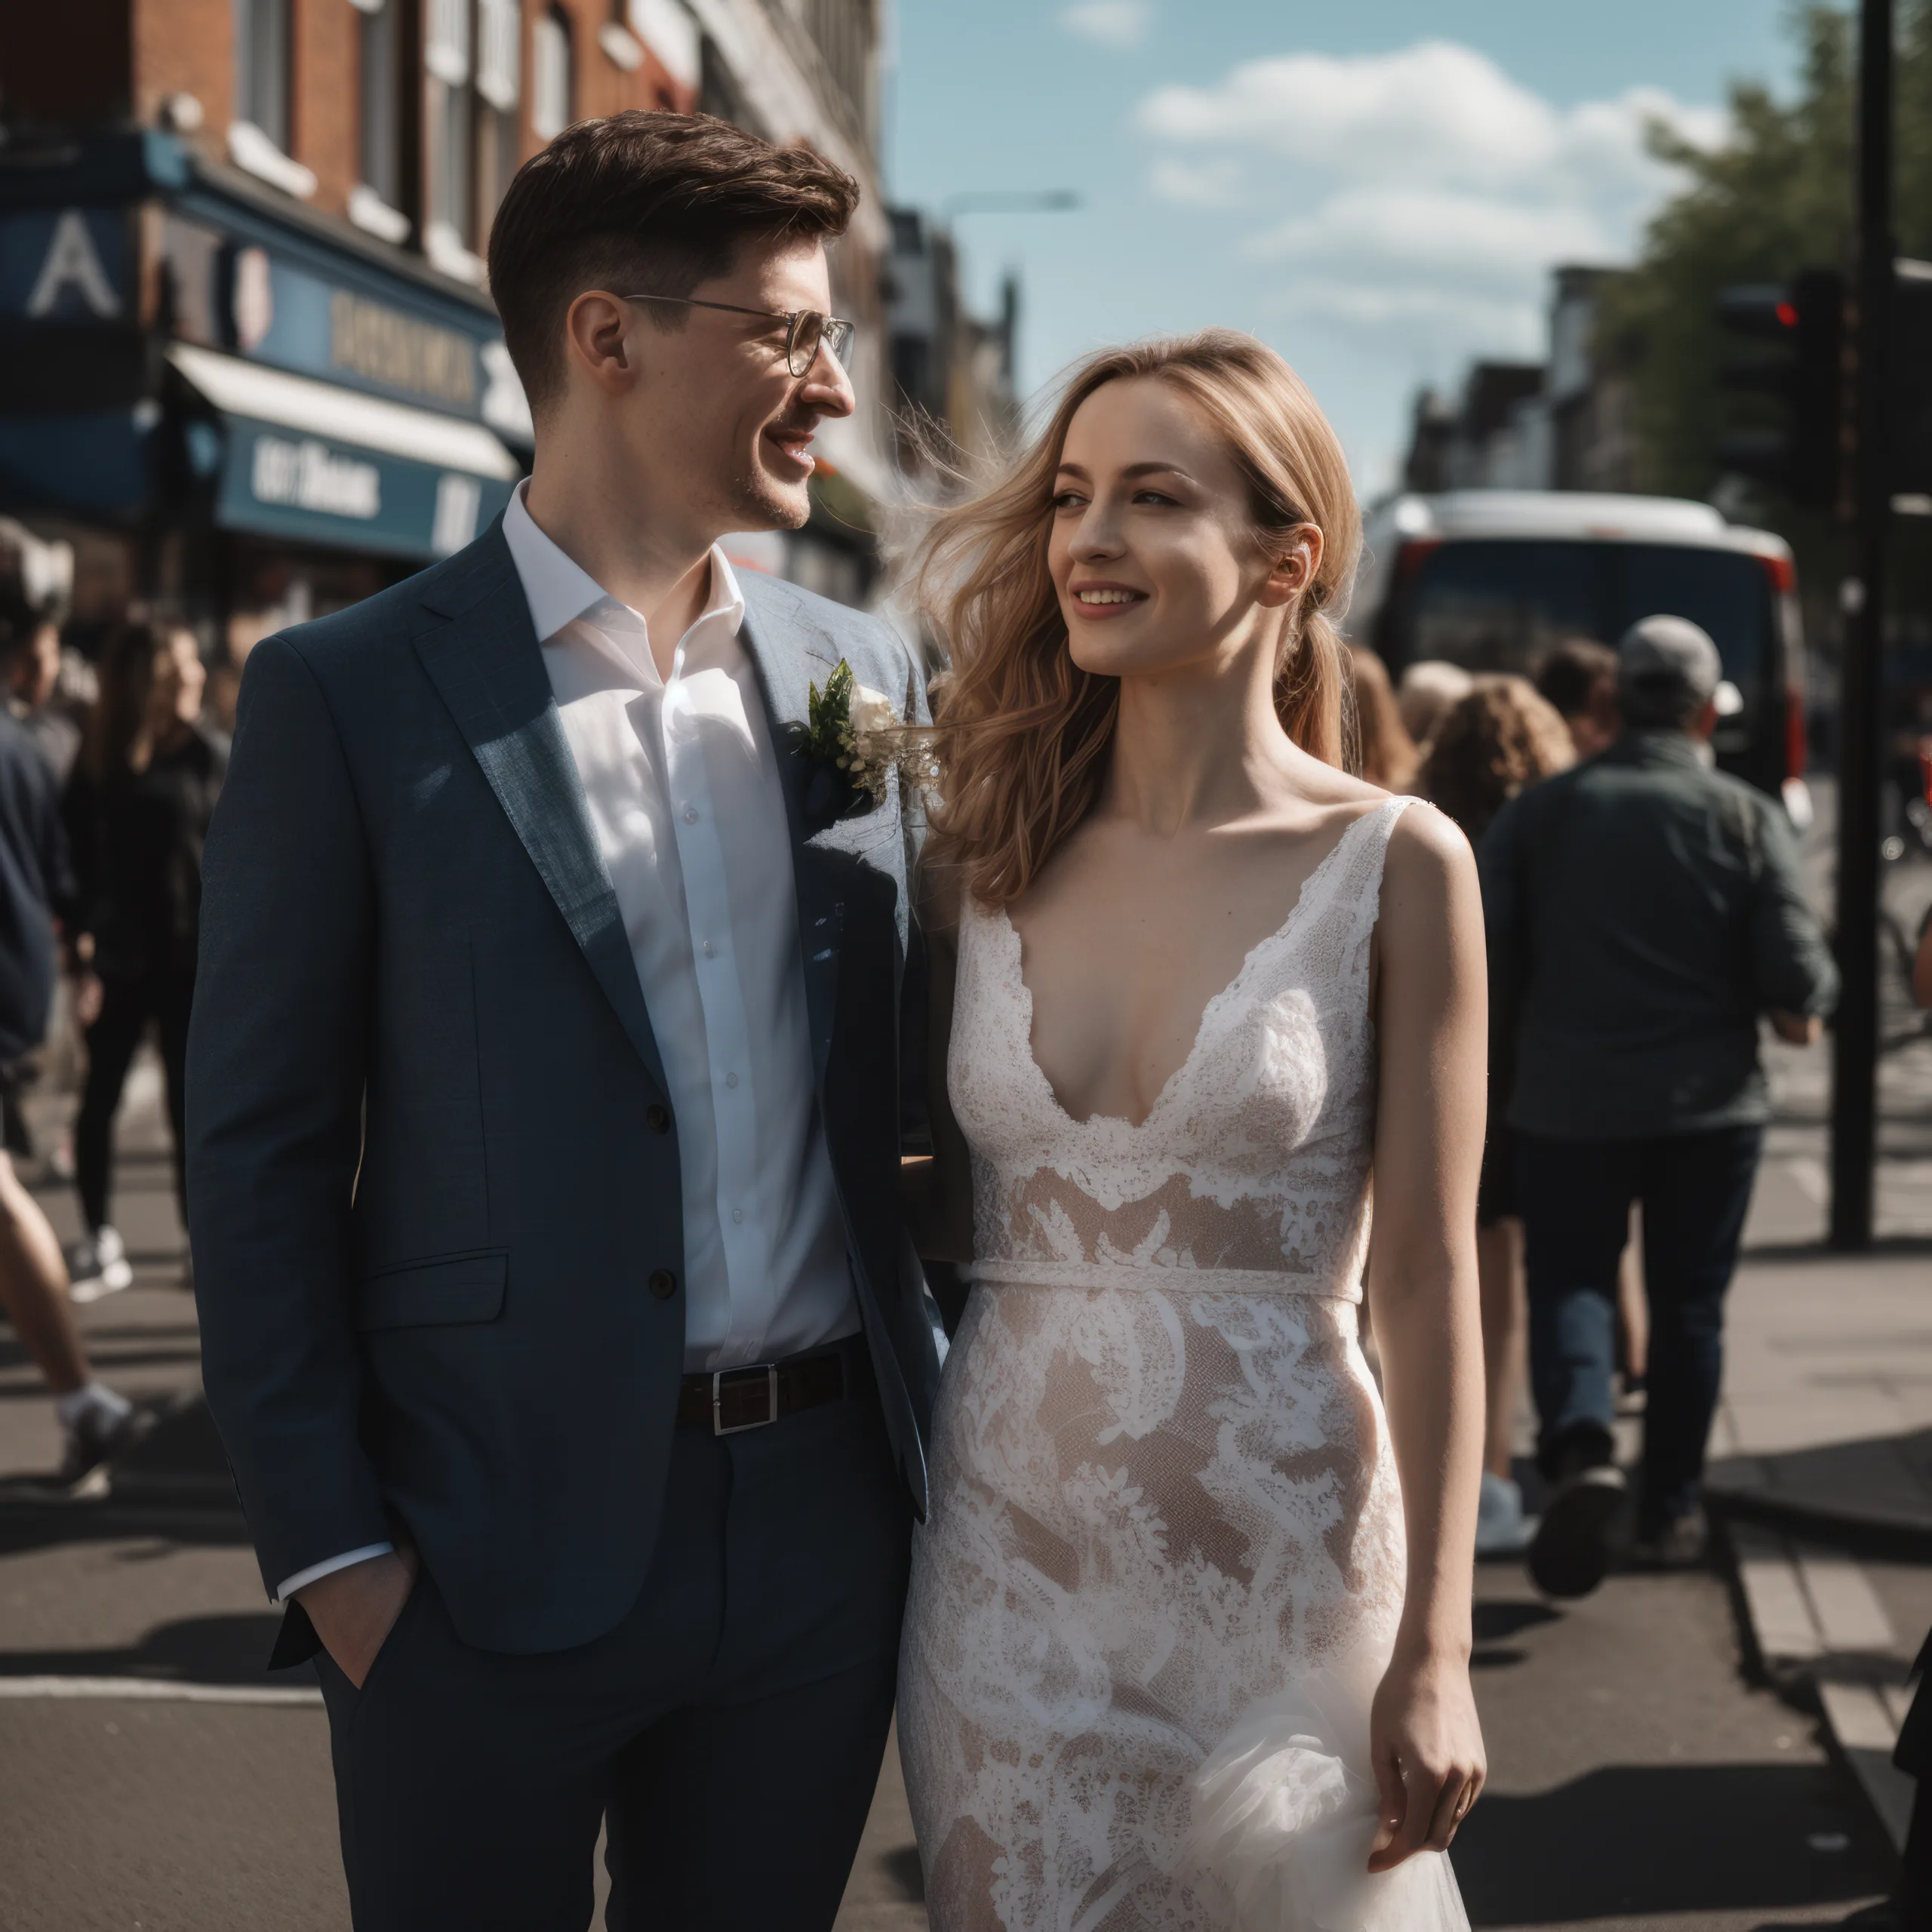 Street Photo of Bride and groom: a man and a woman standing next to each other on a street.